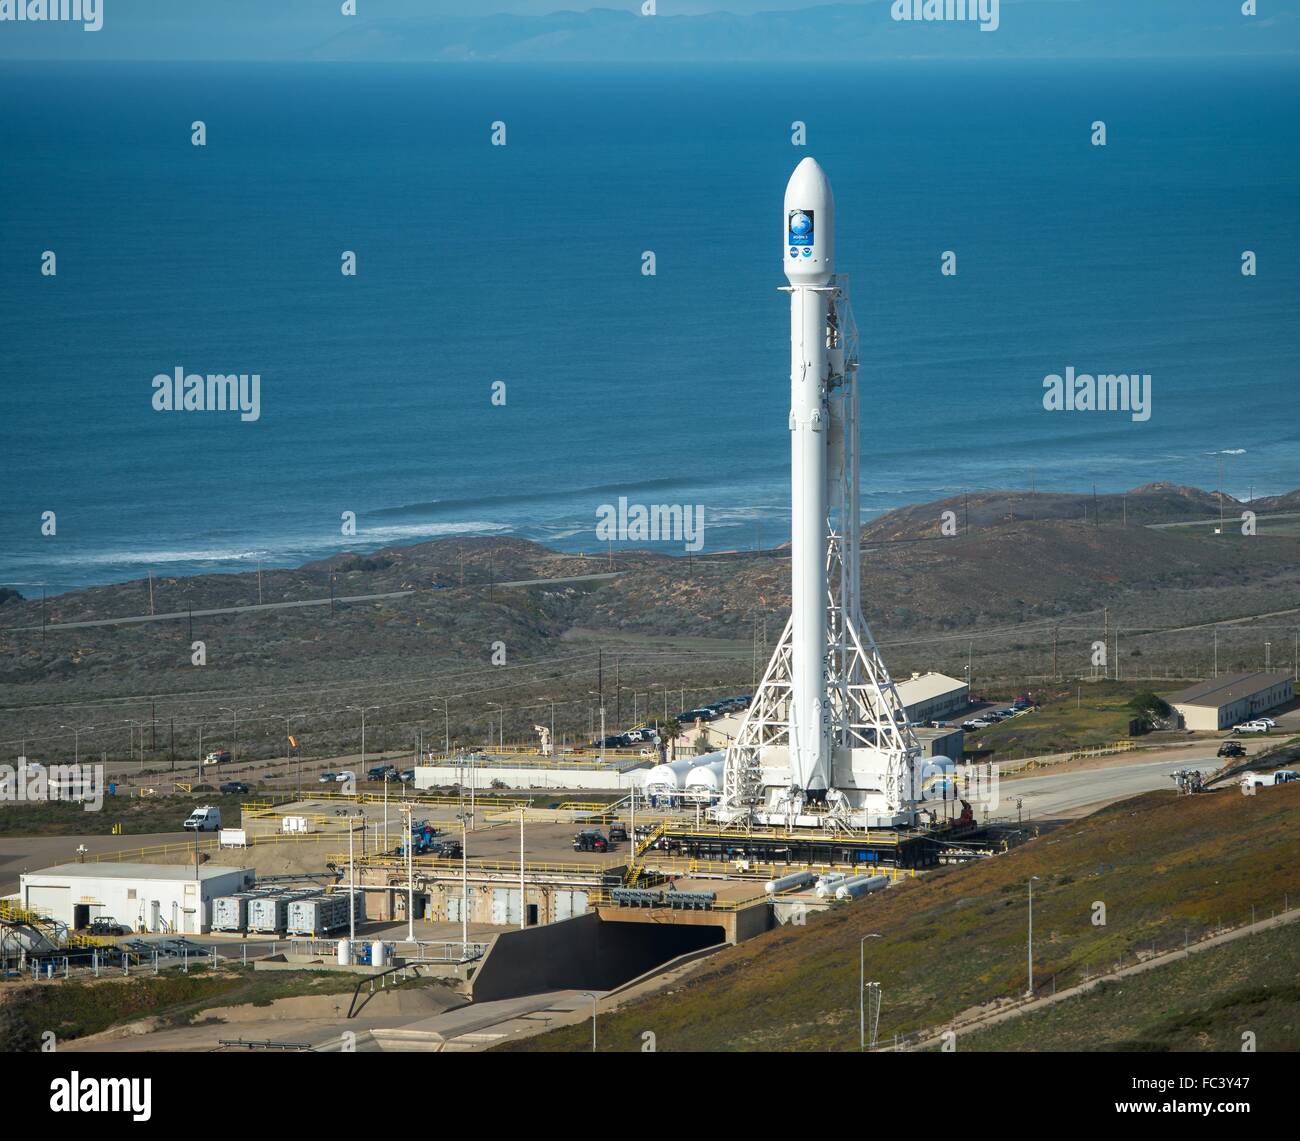 The SpaceX Falcon 9 rocket readies for launch with the Jason-3 spacecraft onboard at Vandenberg Air Force Base Space Launch Complex 4 East January 16, 2016 in Vandenberg, California. Stock Photo